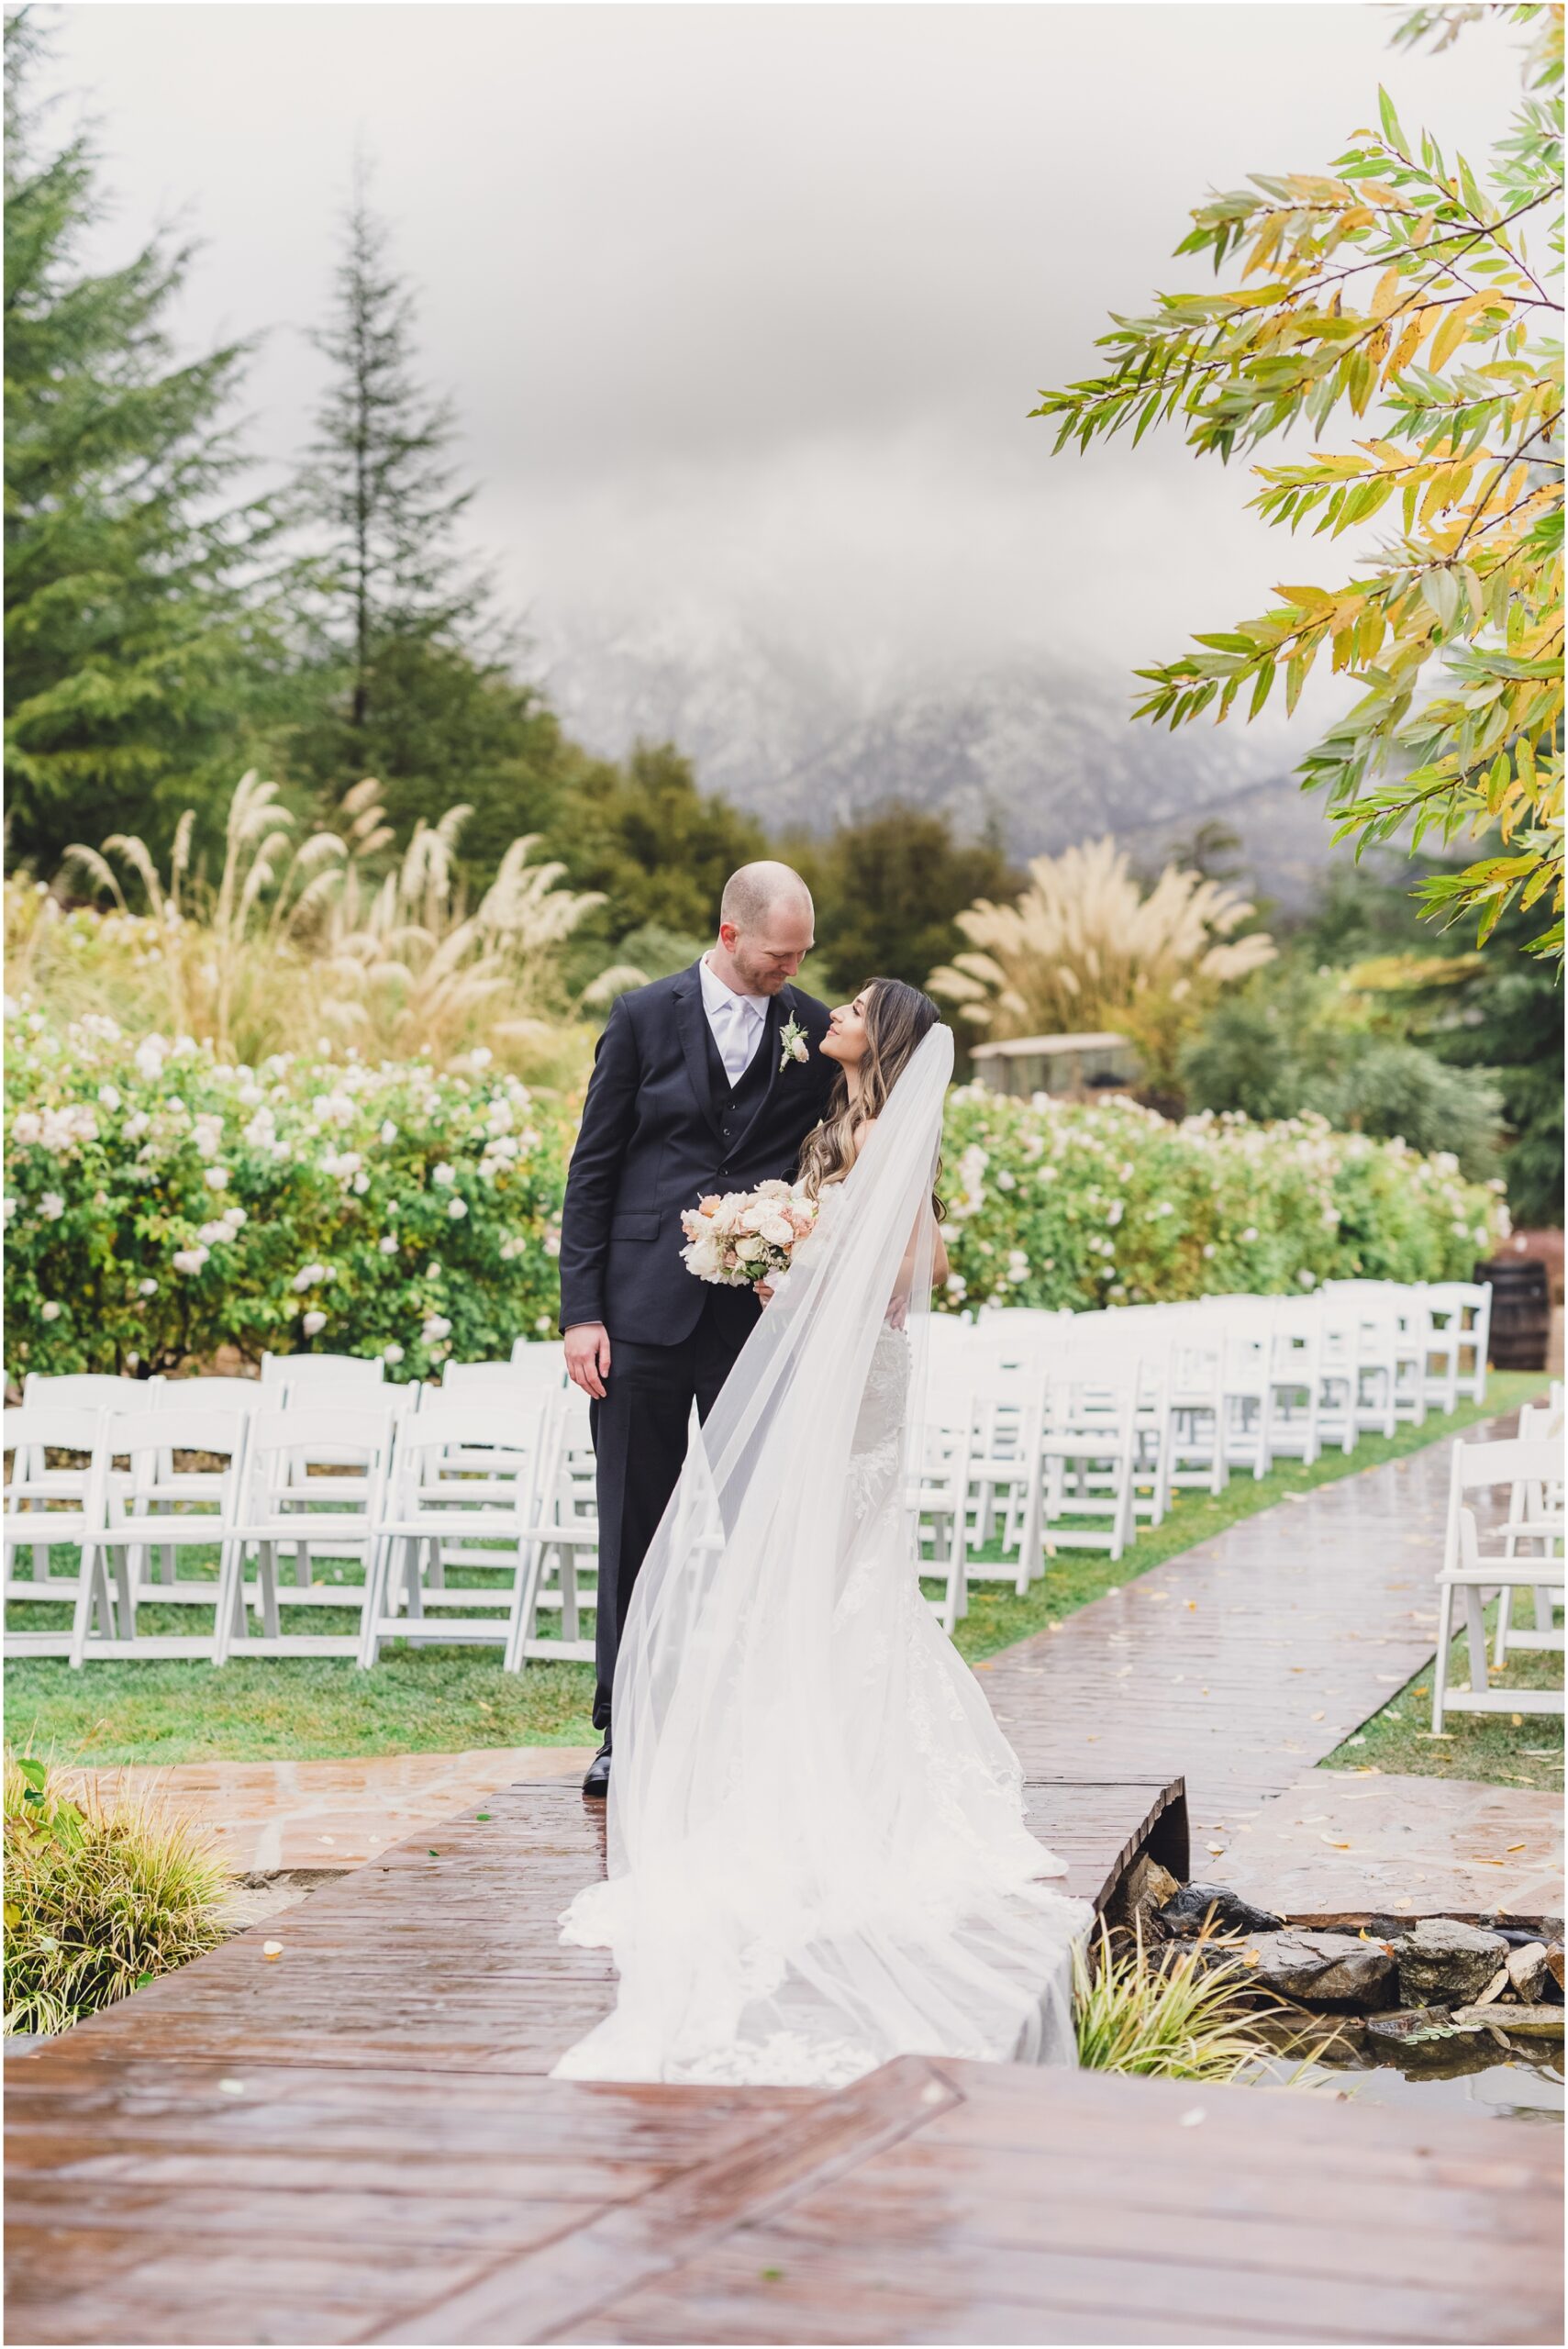 A bride and groom lean into each other at their serendipity gardens wedding